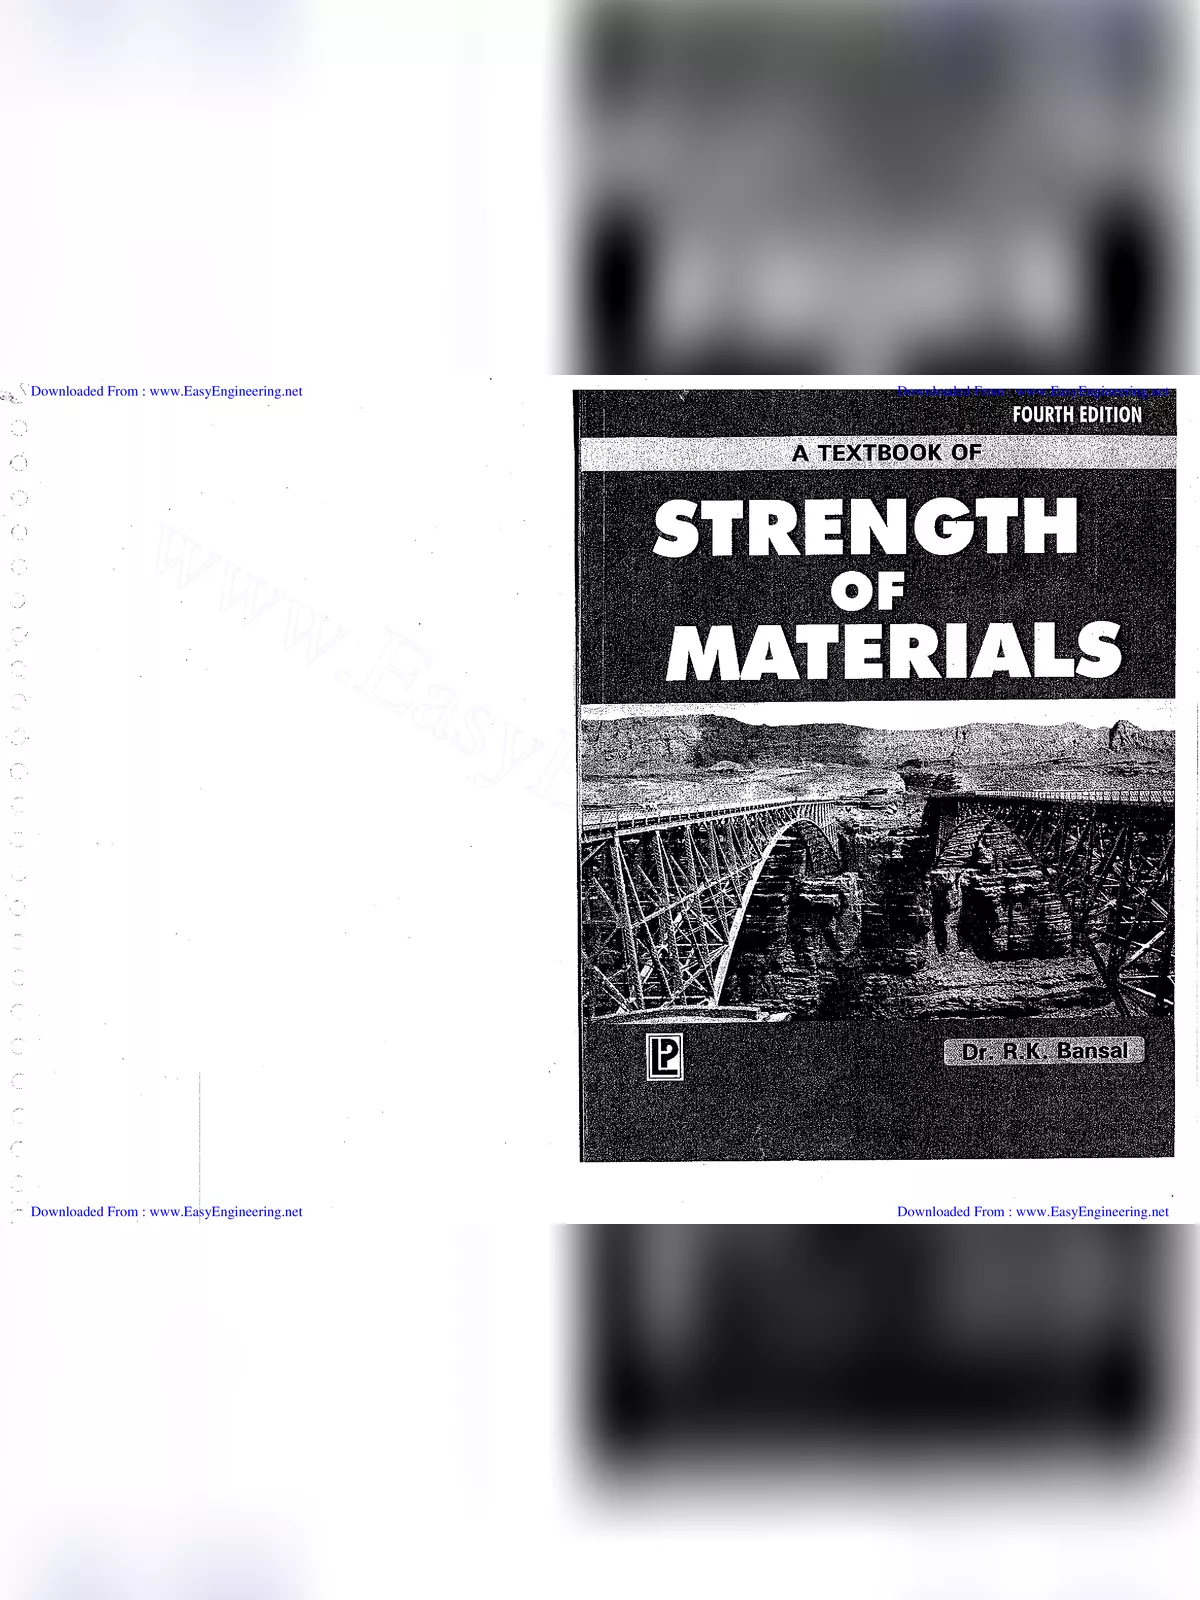 Strength of Materials By Dr. R.K. Bansal